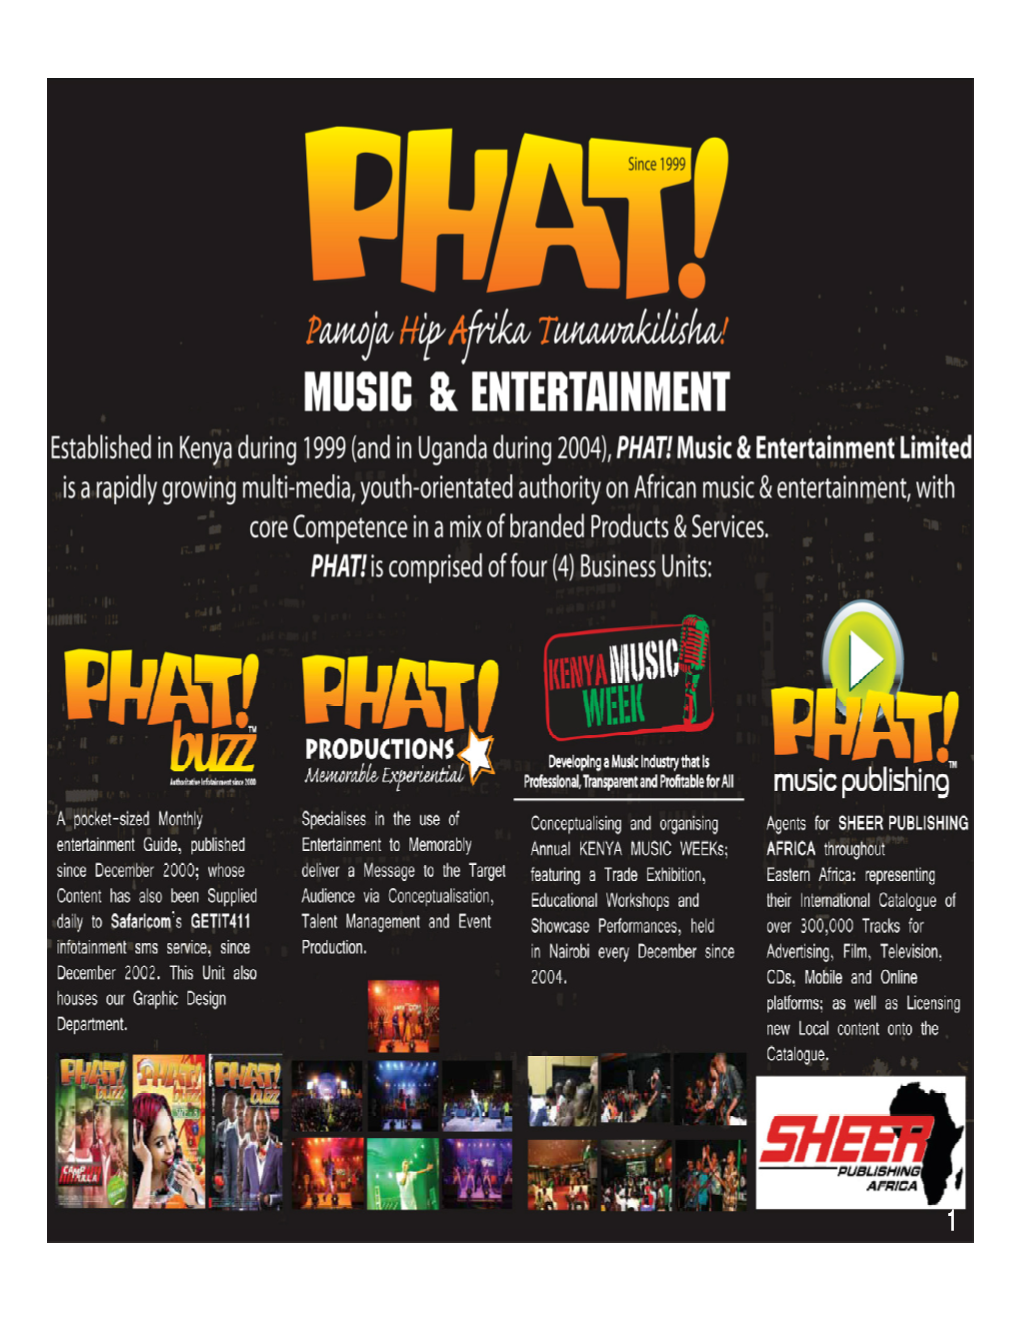 © PHAT! Music & Entertainment Limited (31/03/14) © PHAT! Music & Entertainment Limited (20.09.2013) 1